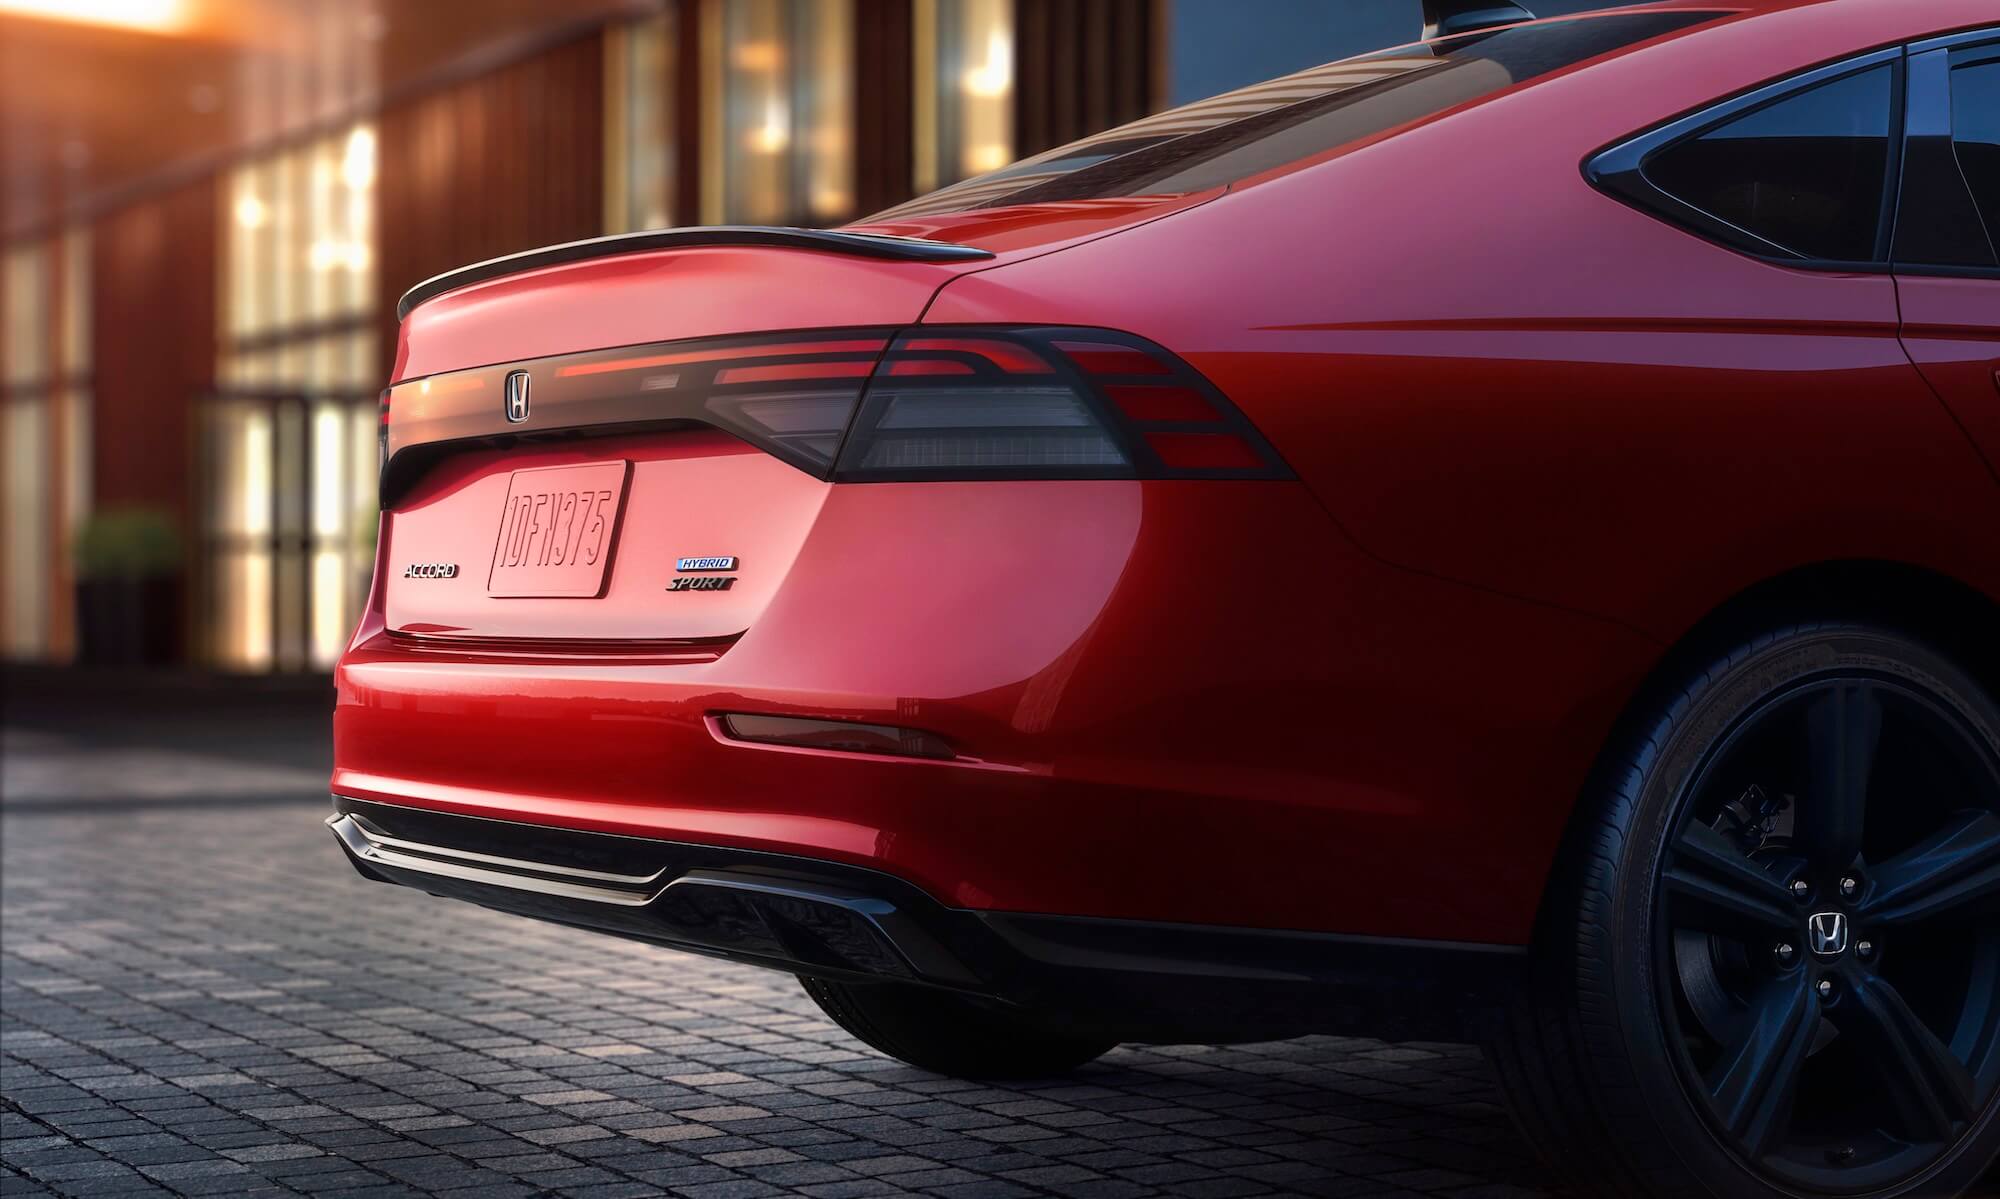 The 2023 Honda Accord rear in red. Among 2023 Honda family cars, the Accord is a premier option.